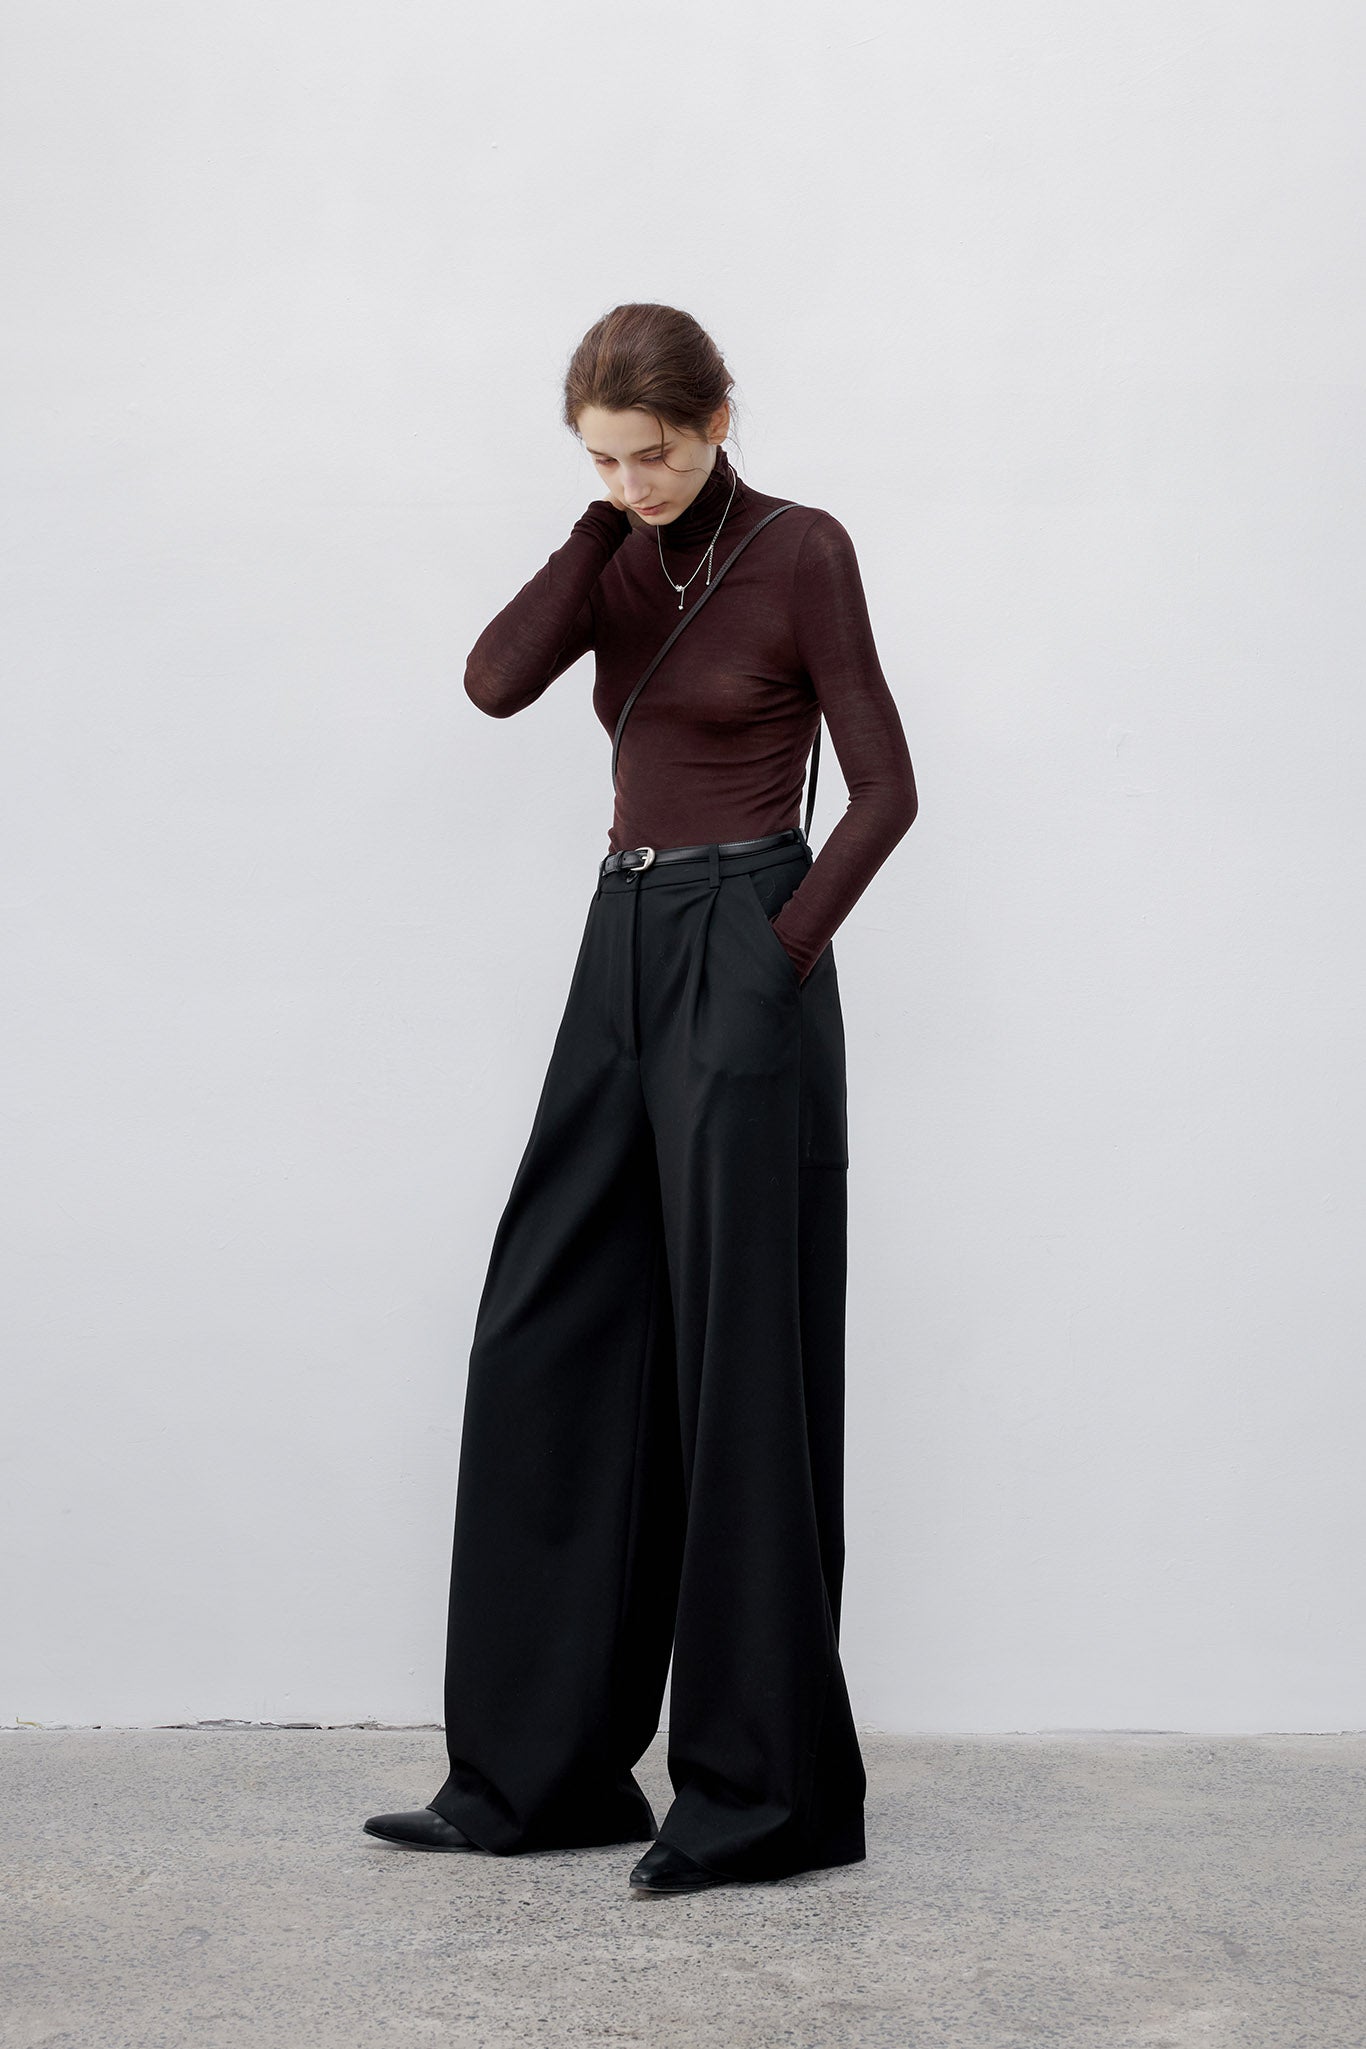 [tageechita] "T" embroidered Lina low straight pants